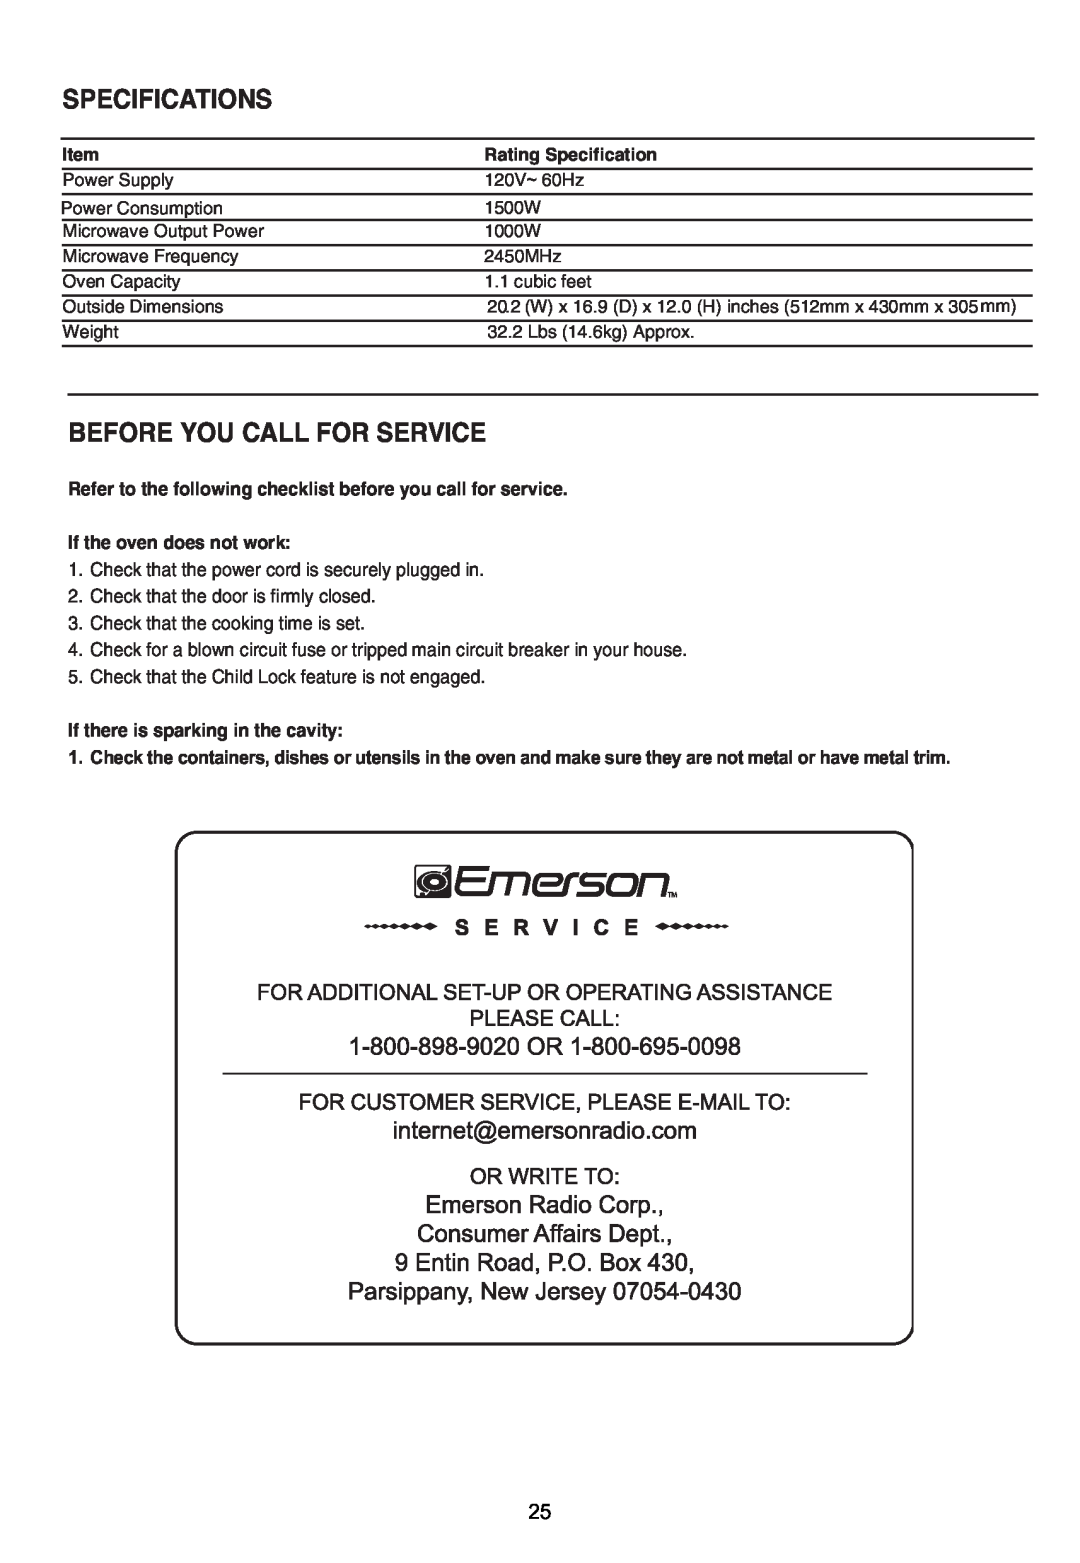 Emerson MW1161SB Specifications, Before You Call For Service, Refer to the following checklist before you call for service 